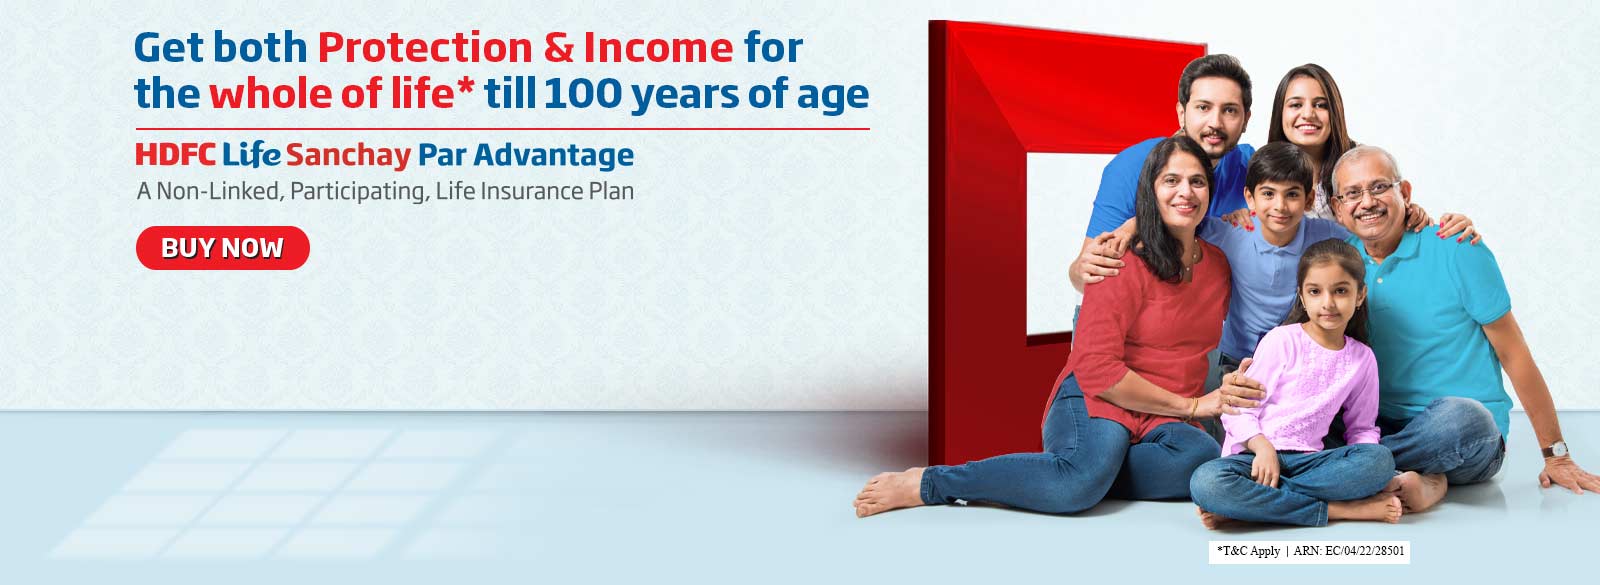 Hdfc Life Insurance Online Life Insurance Plans And Policies In India 9170